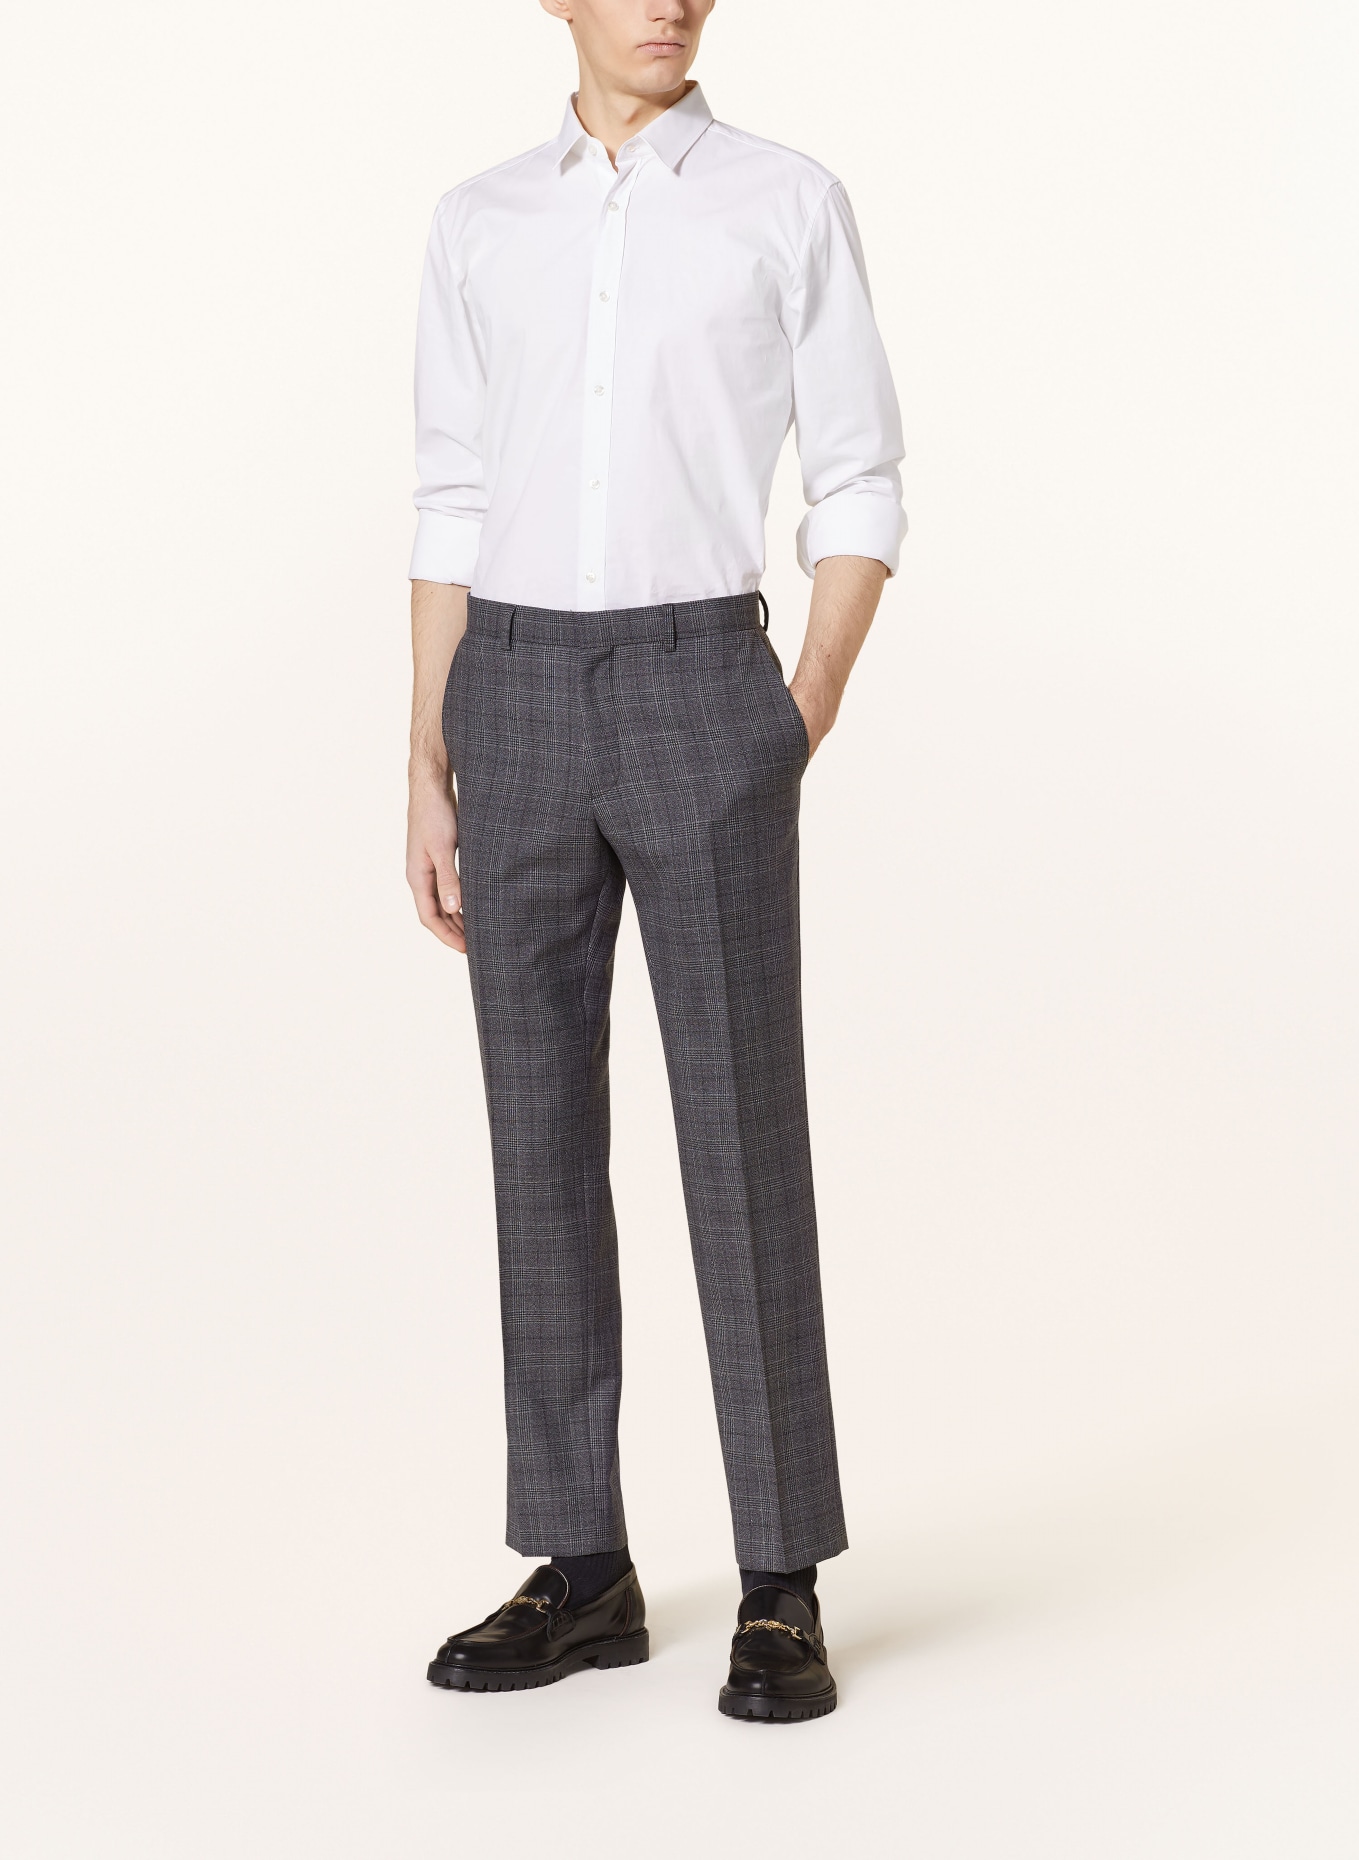 TED BAKER Anzughose ZIONST Slim Fit, Farbe: CHARCOAL CHARCOAL (Bild 3)